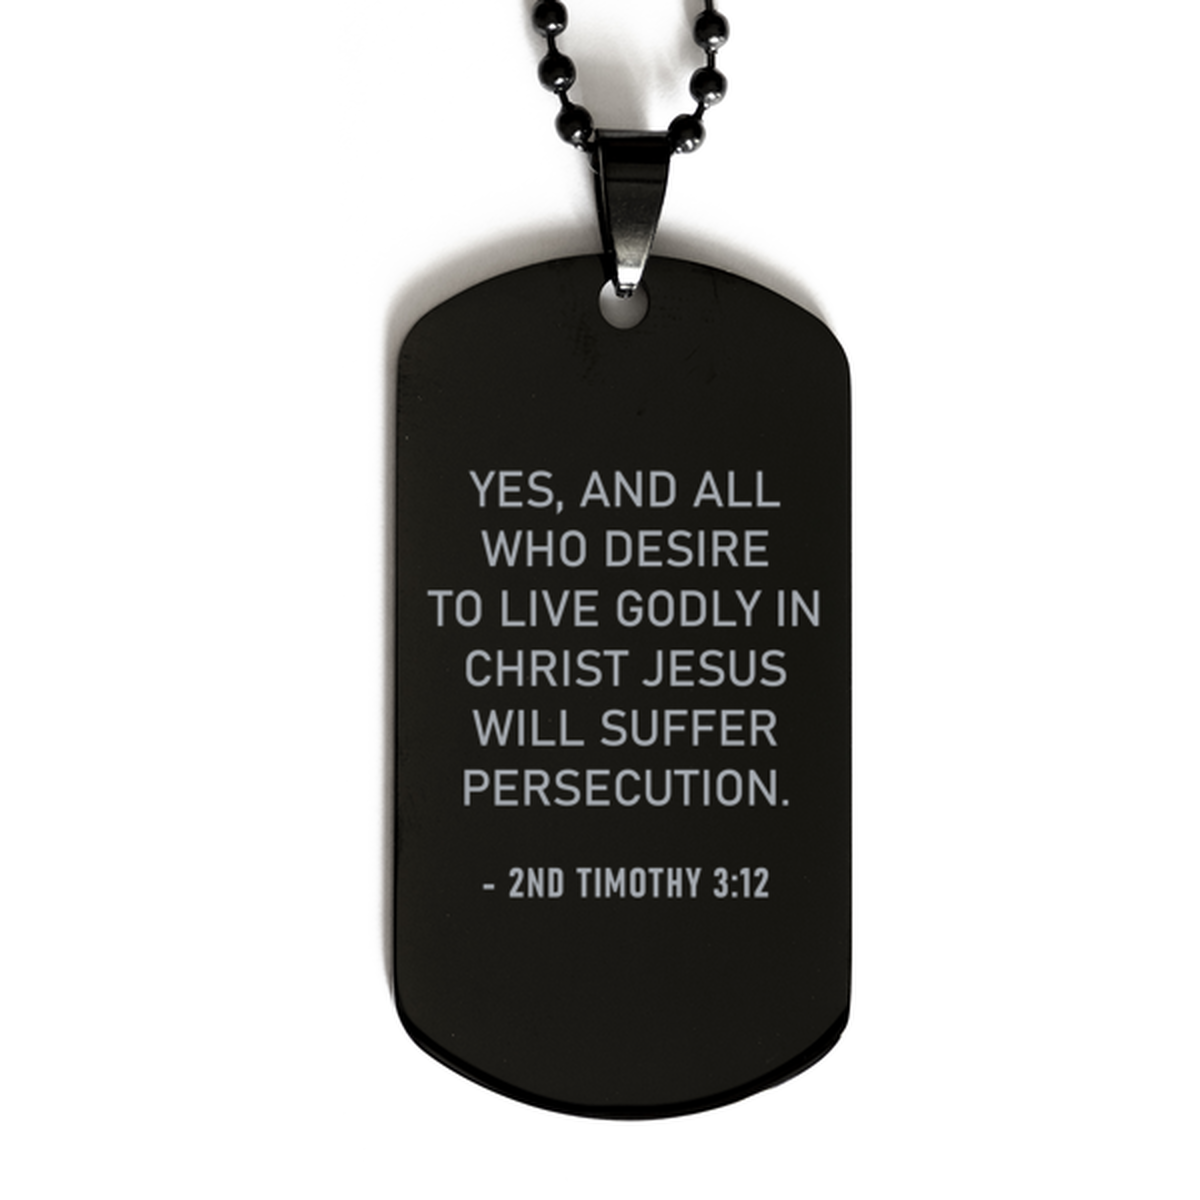 Bible Verse Black Dog Tag, 2Nd Timothy 3:12 Yes, And All Who Desire To Live Godly In, Christian Inspirational Necklace Gifts For Men Women